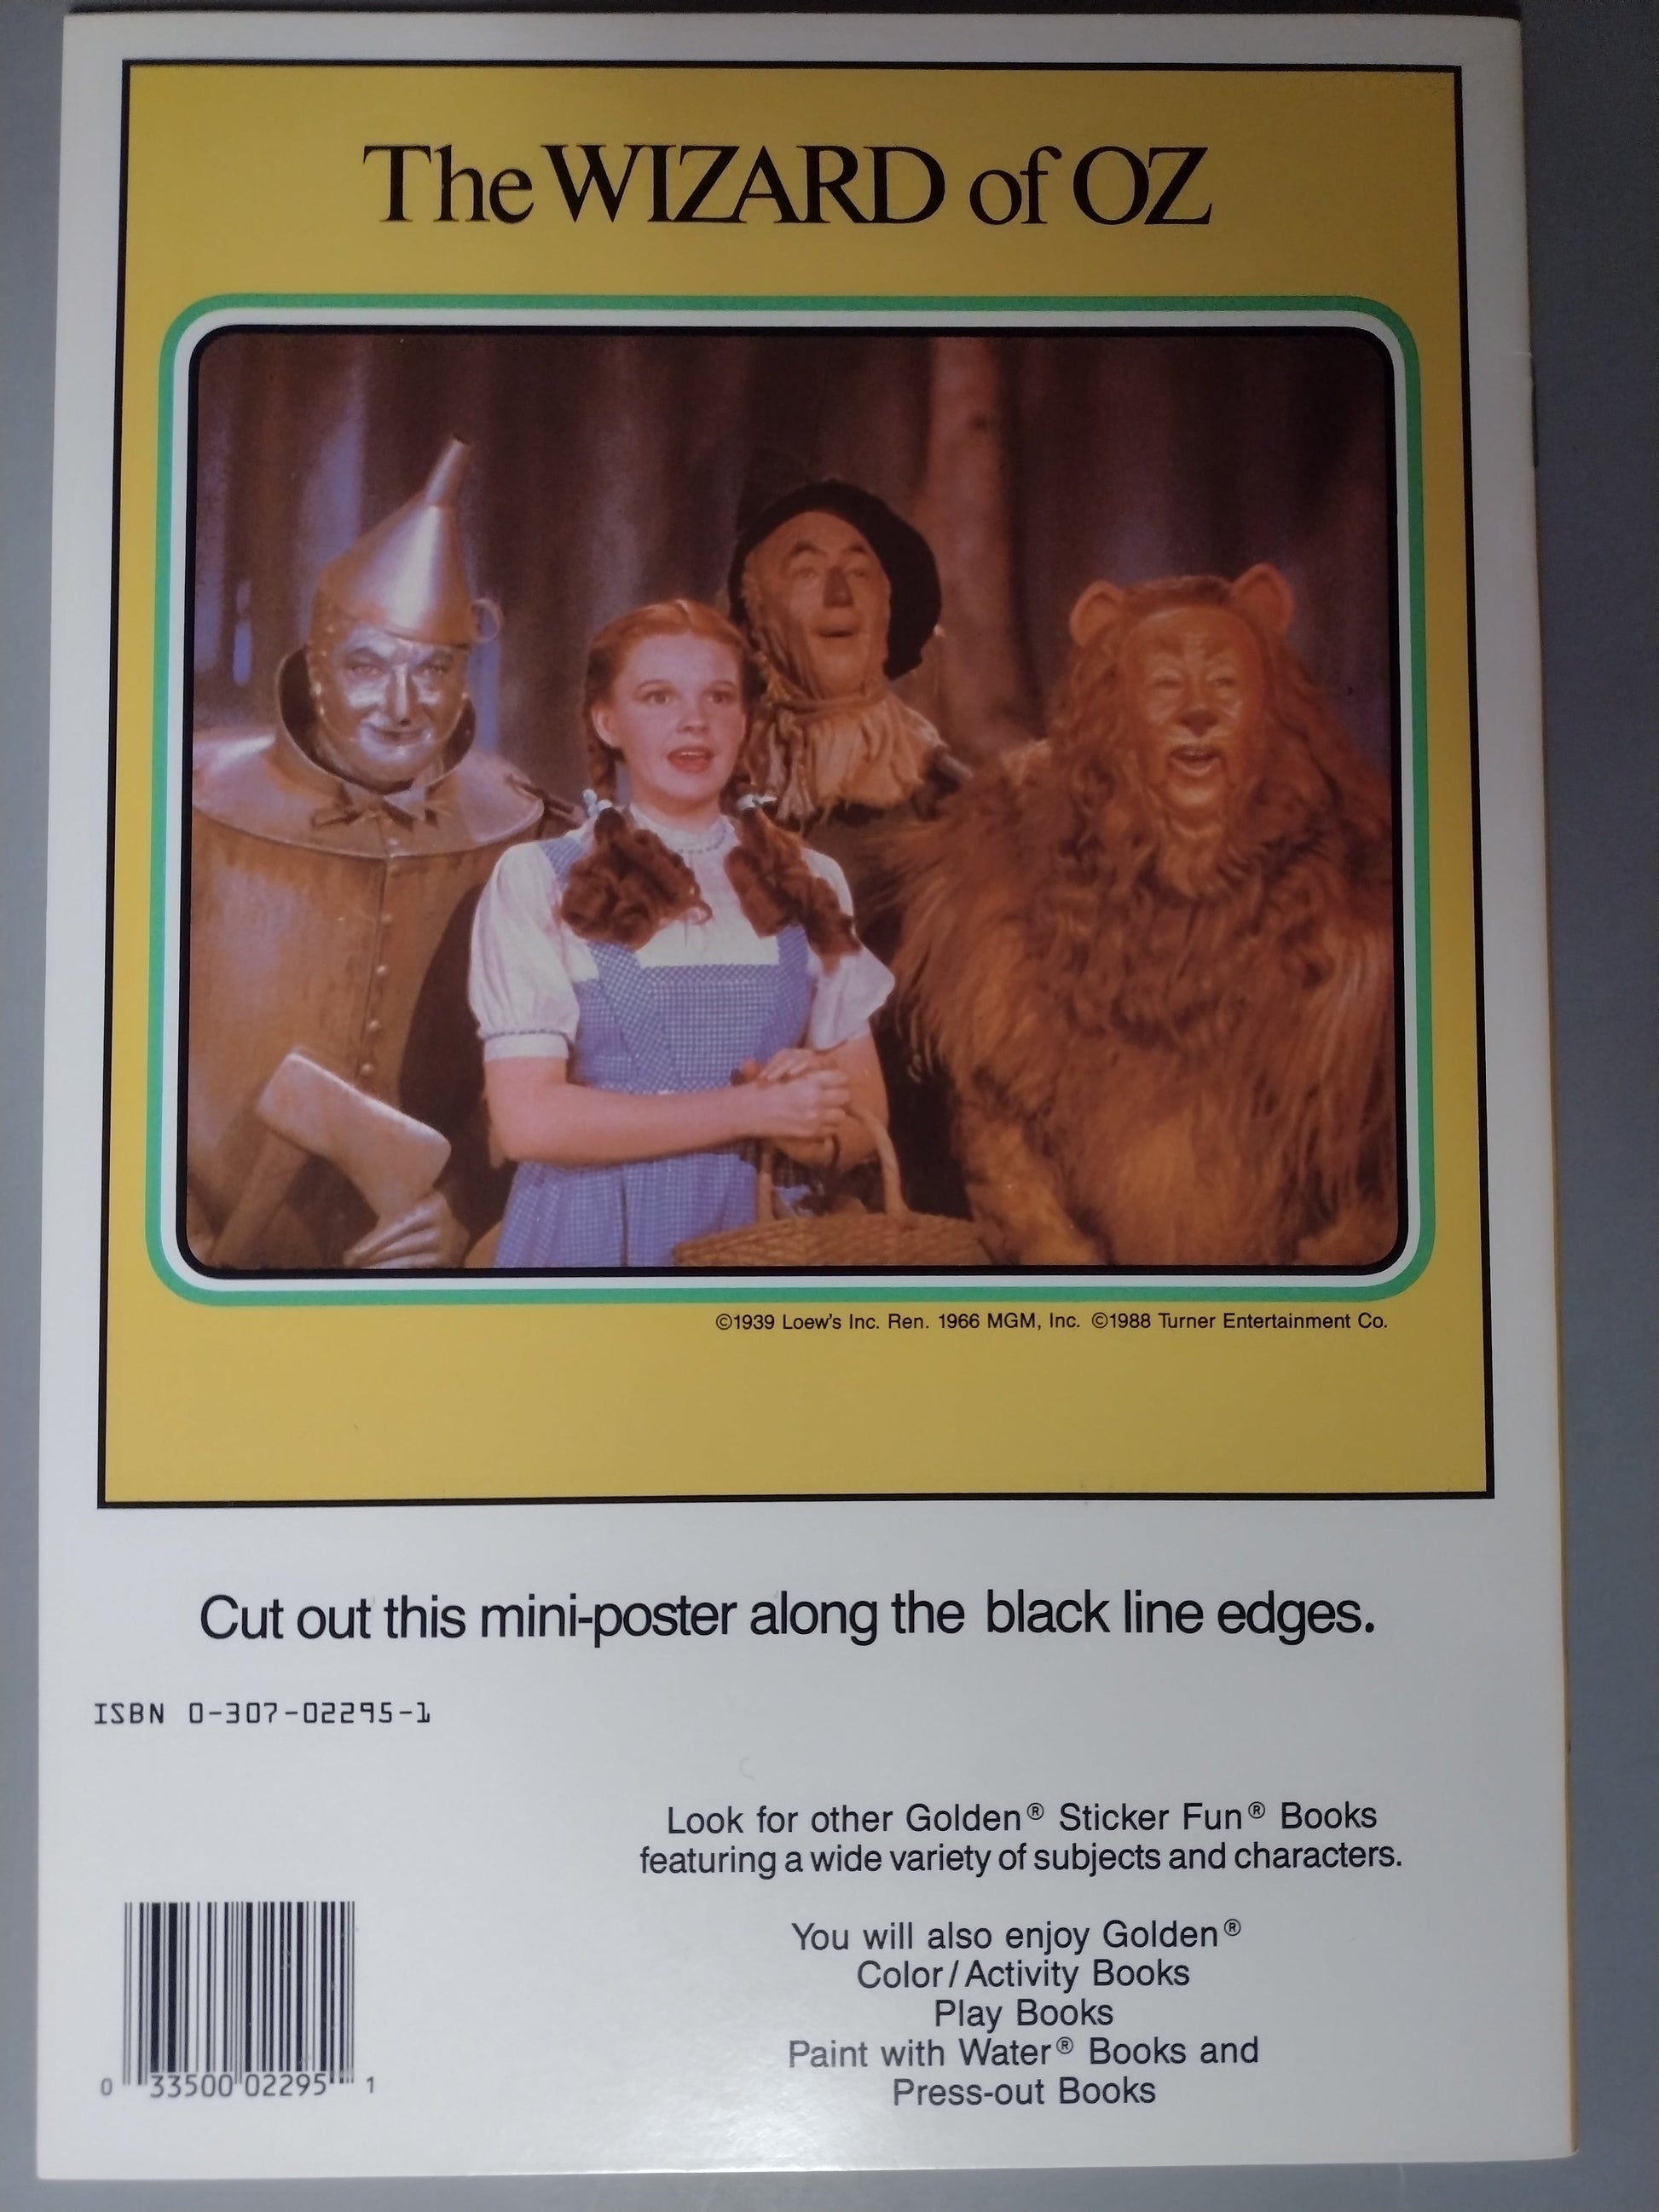 The Wizard of Oz.  The back has a picture of Dorothy and here friends. Cut out this mini-poster along the black line edges. 